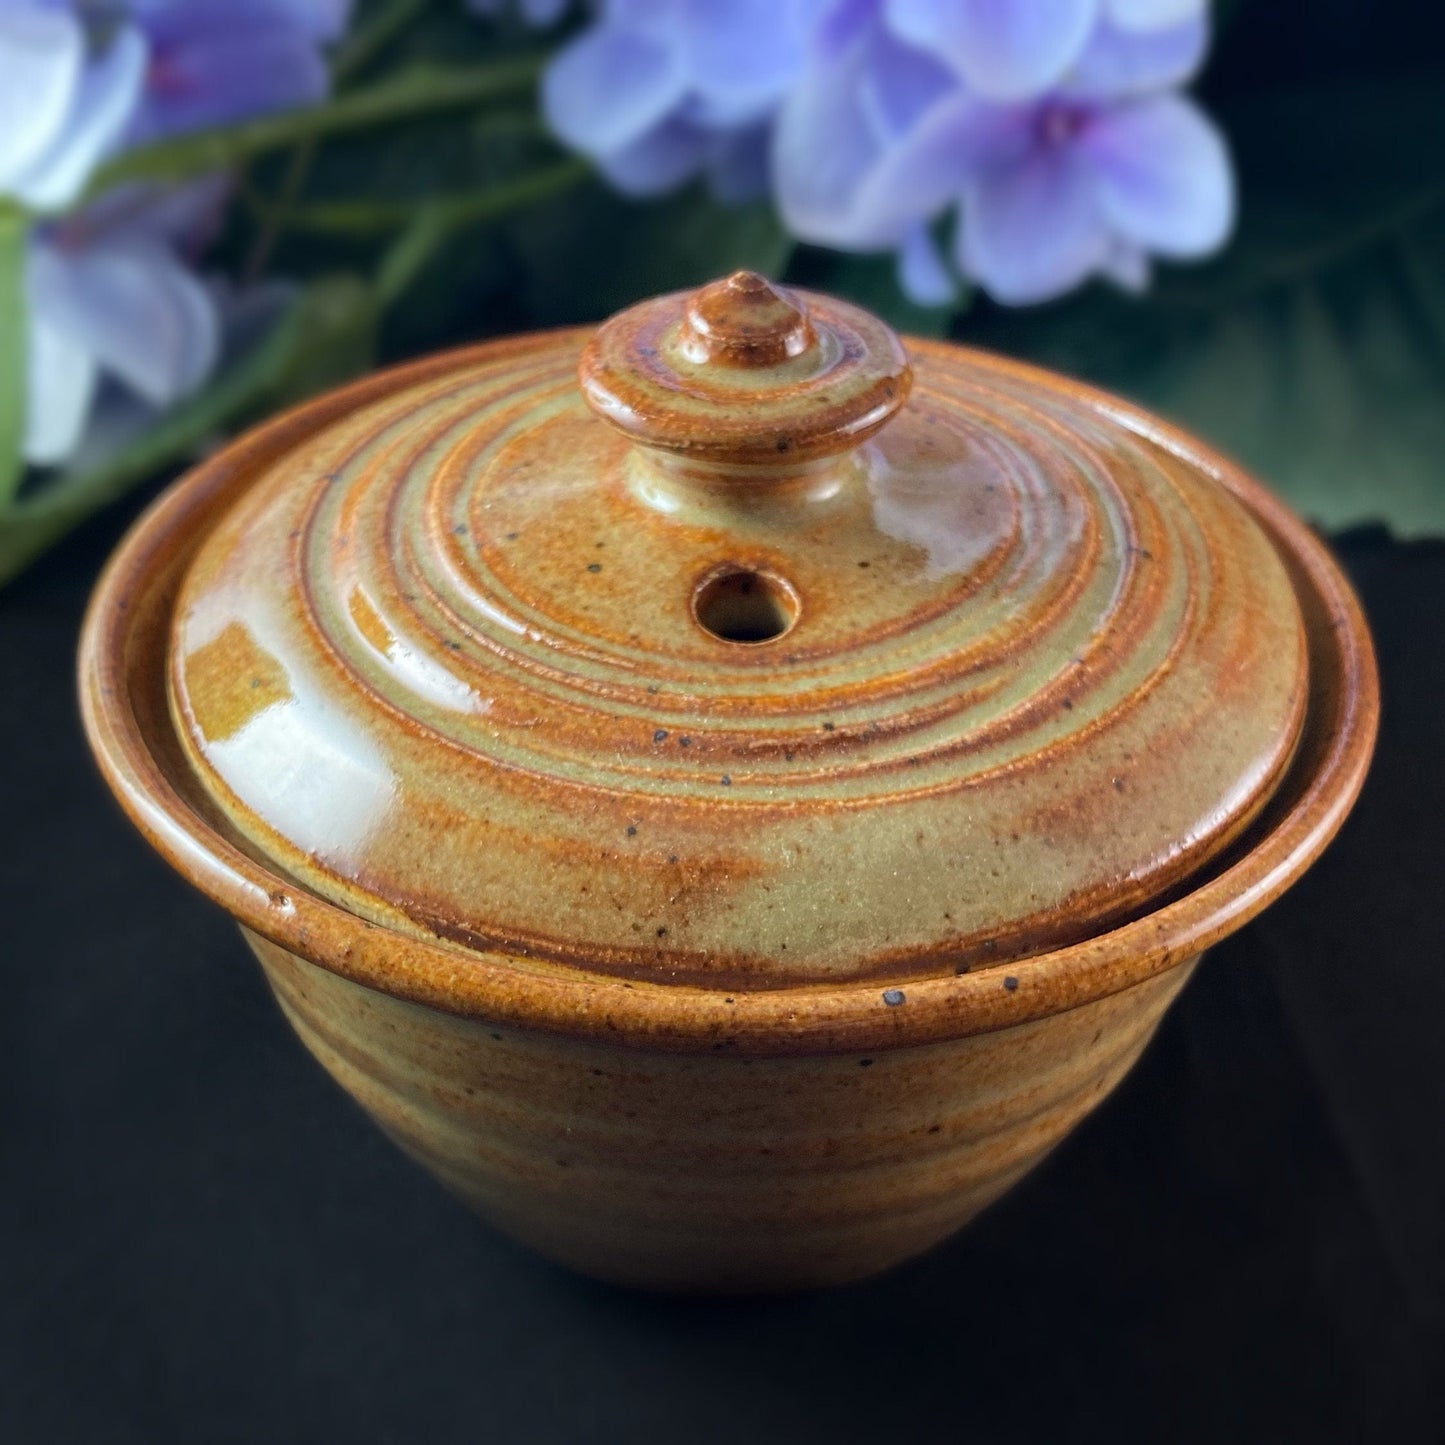 Tan Ceramic Egg Cooker - Handmade Handcrafted Pottery Made in America